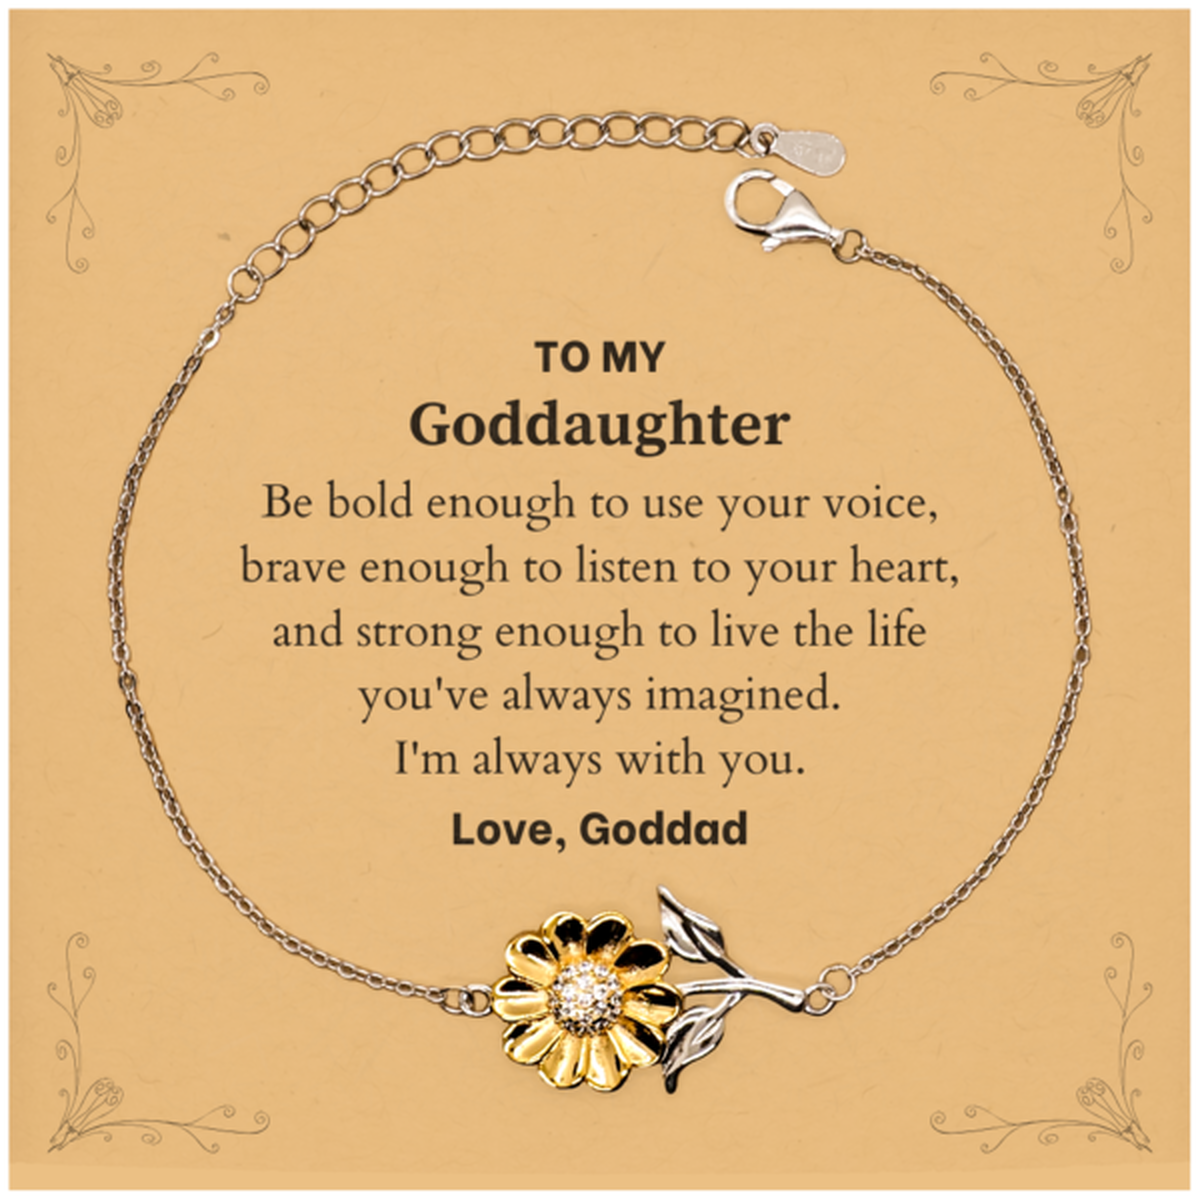 Keepsake Goddaughter Sunflower Bracelet Gift Idea Graduation Christmas Birthday Goddaughter from Goddad, Goddaughter Be bold enough to use your voice, brave enough to listen to your heart. Love, Goddad